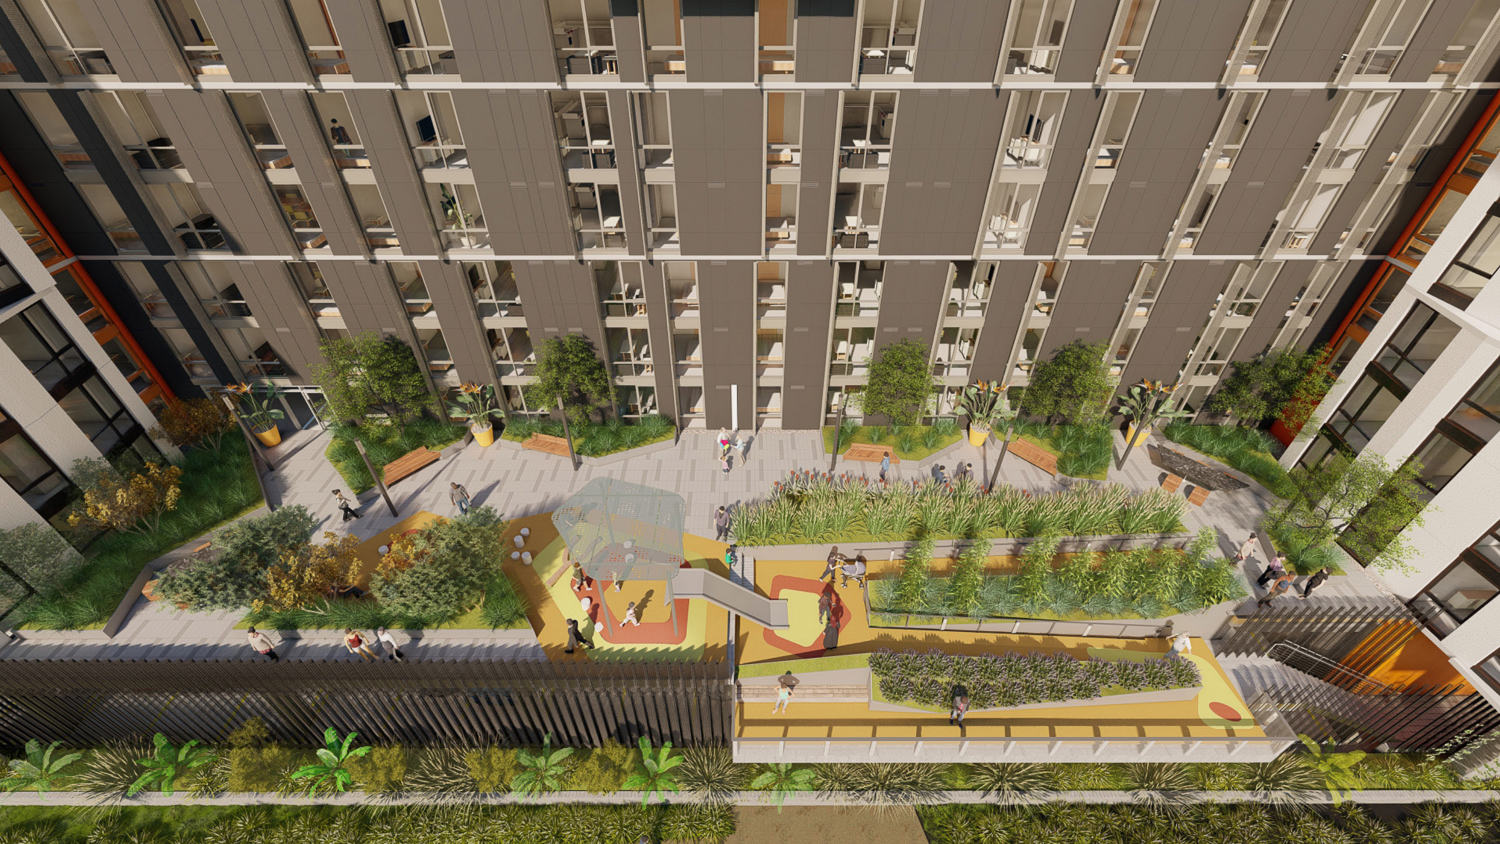 Block 9A design at 400 China Basin Street landscaped terrace, rendering by Mithun